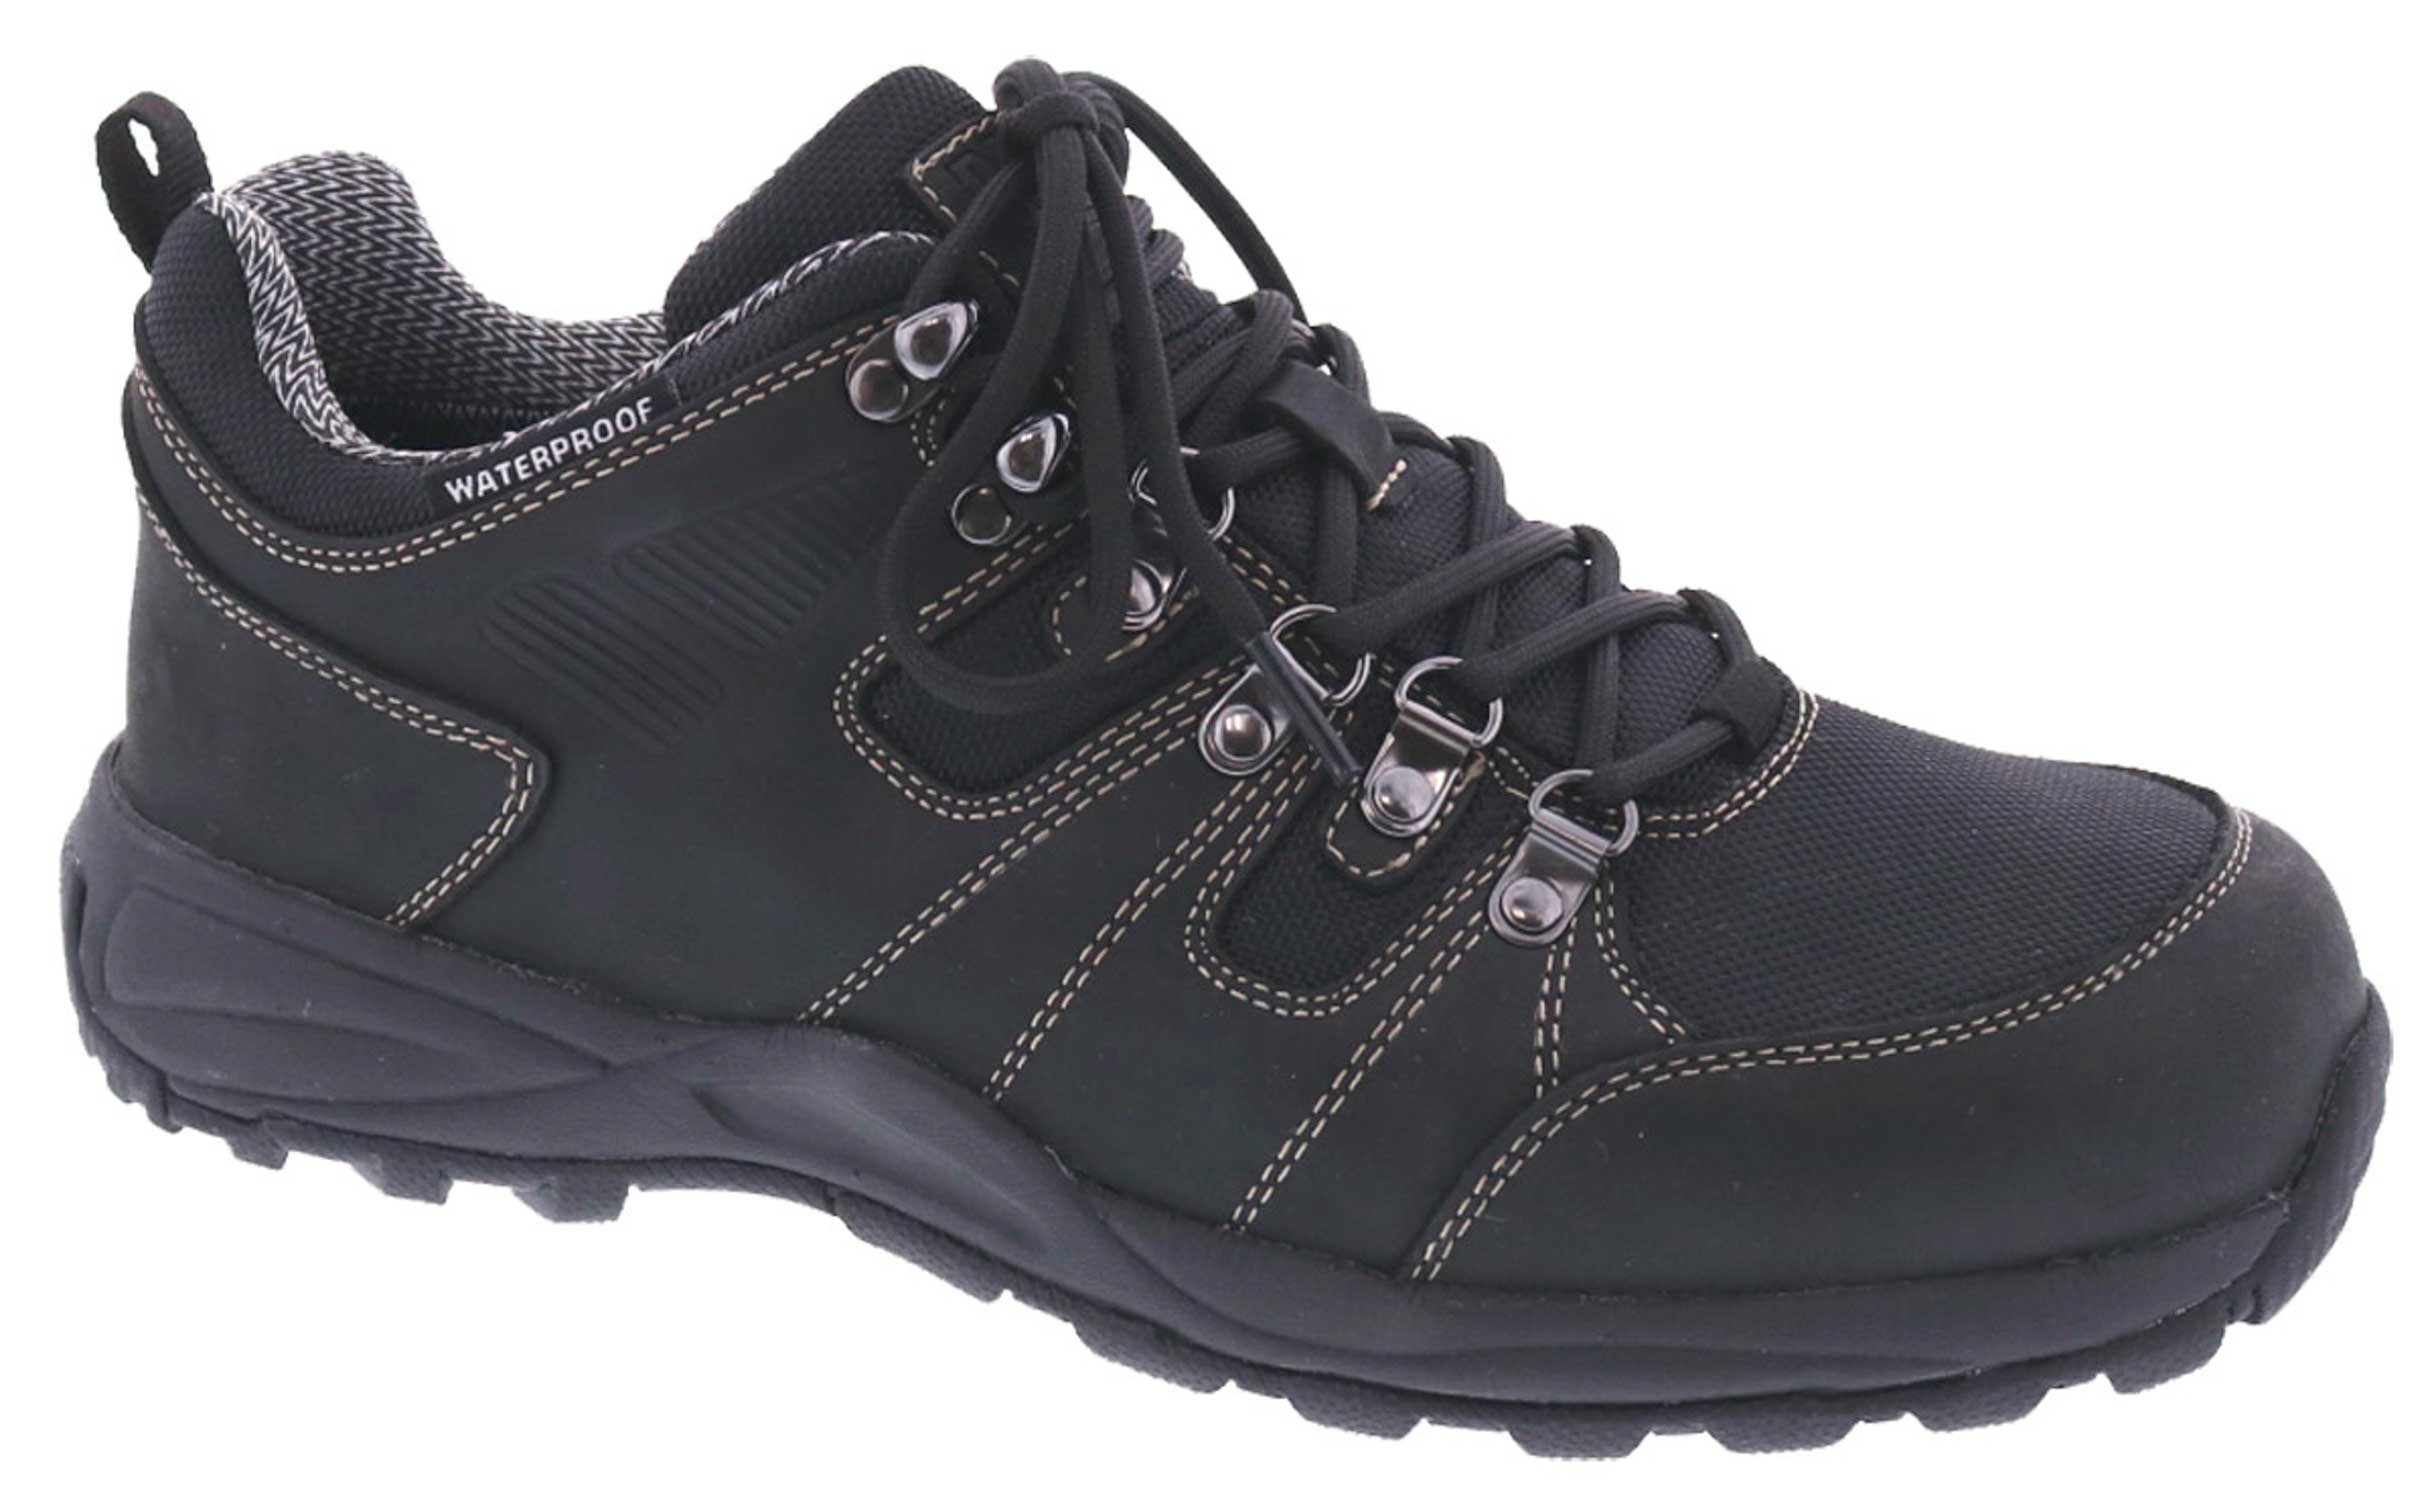 Drew Shoes Canyon 40737 - Men's 2 Casual Comfort Therapeutic Diabetic Hiking Boot - Extra Depth For Orthotics